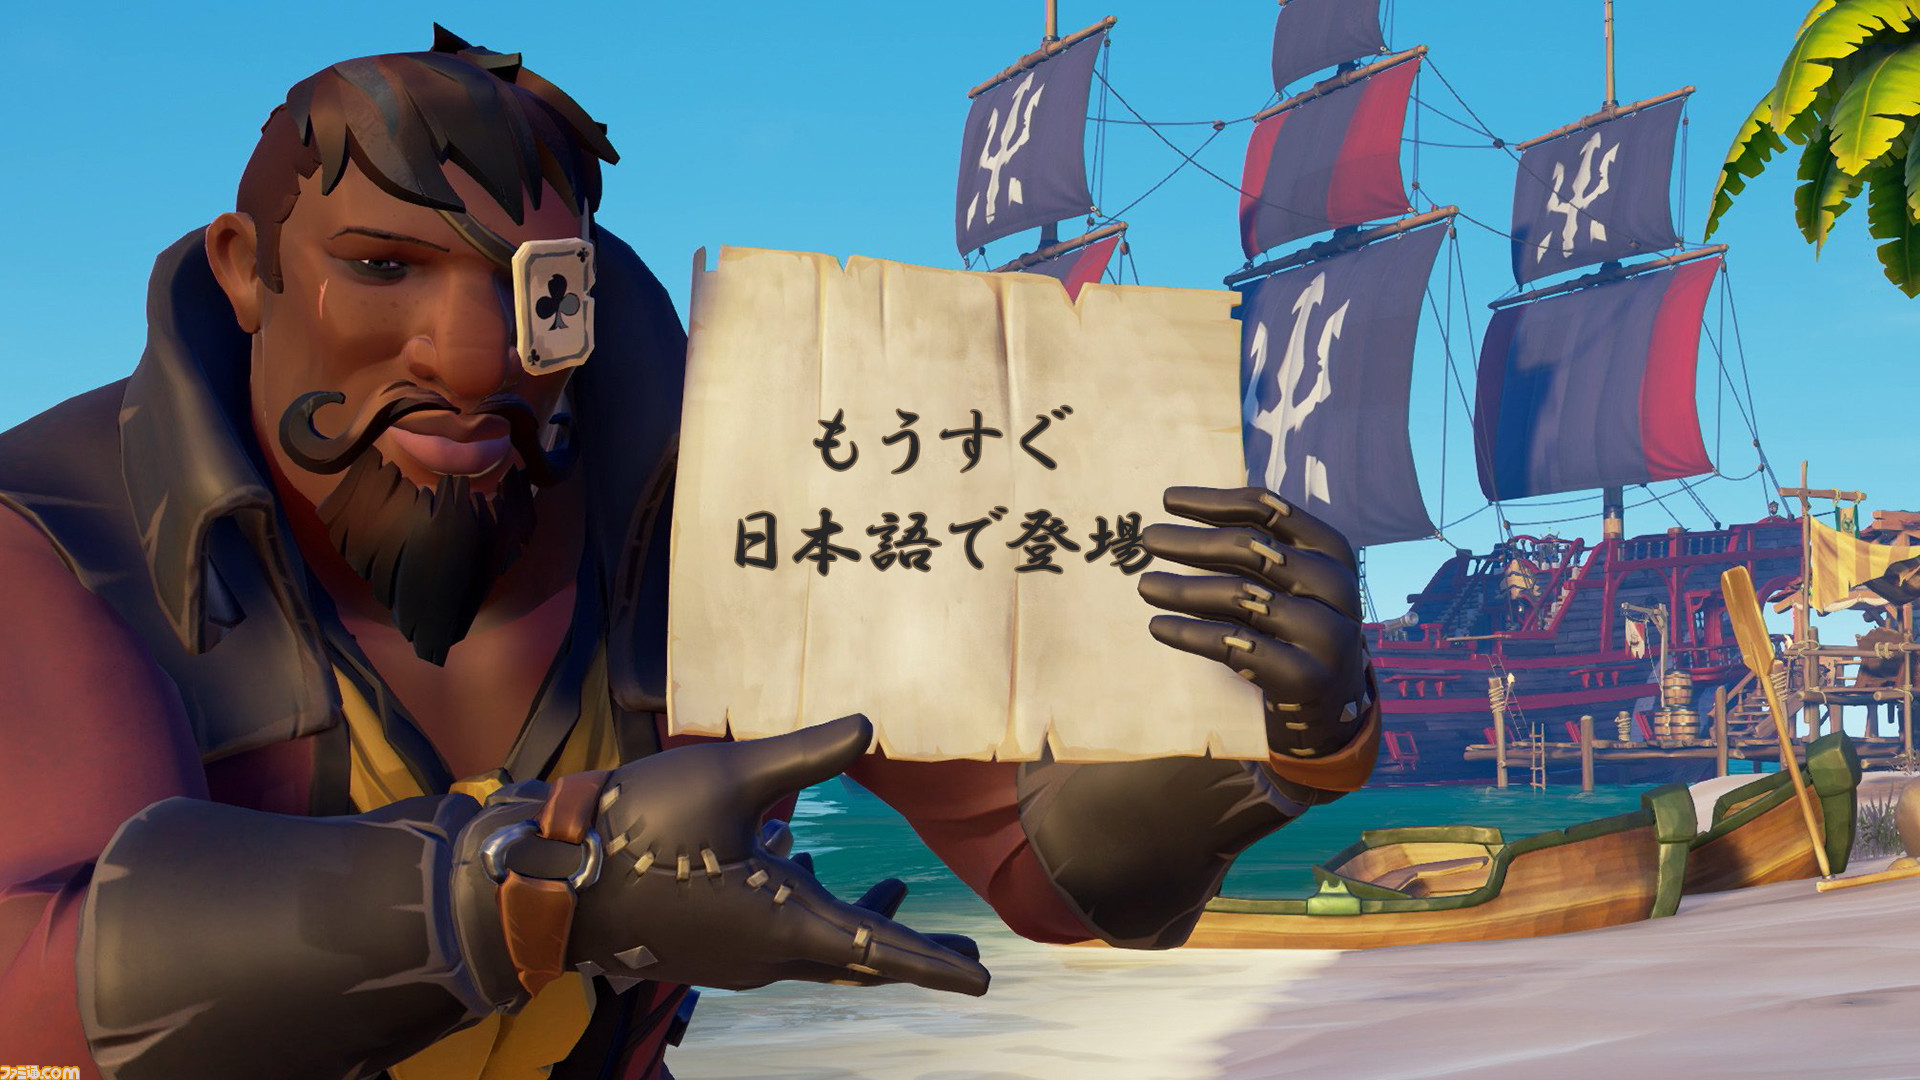 Sea of thieves ps4. Sea of Thieves на пс4. Sea of Thieves PLAYSTATION. Japanese Pirate.